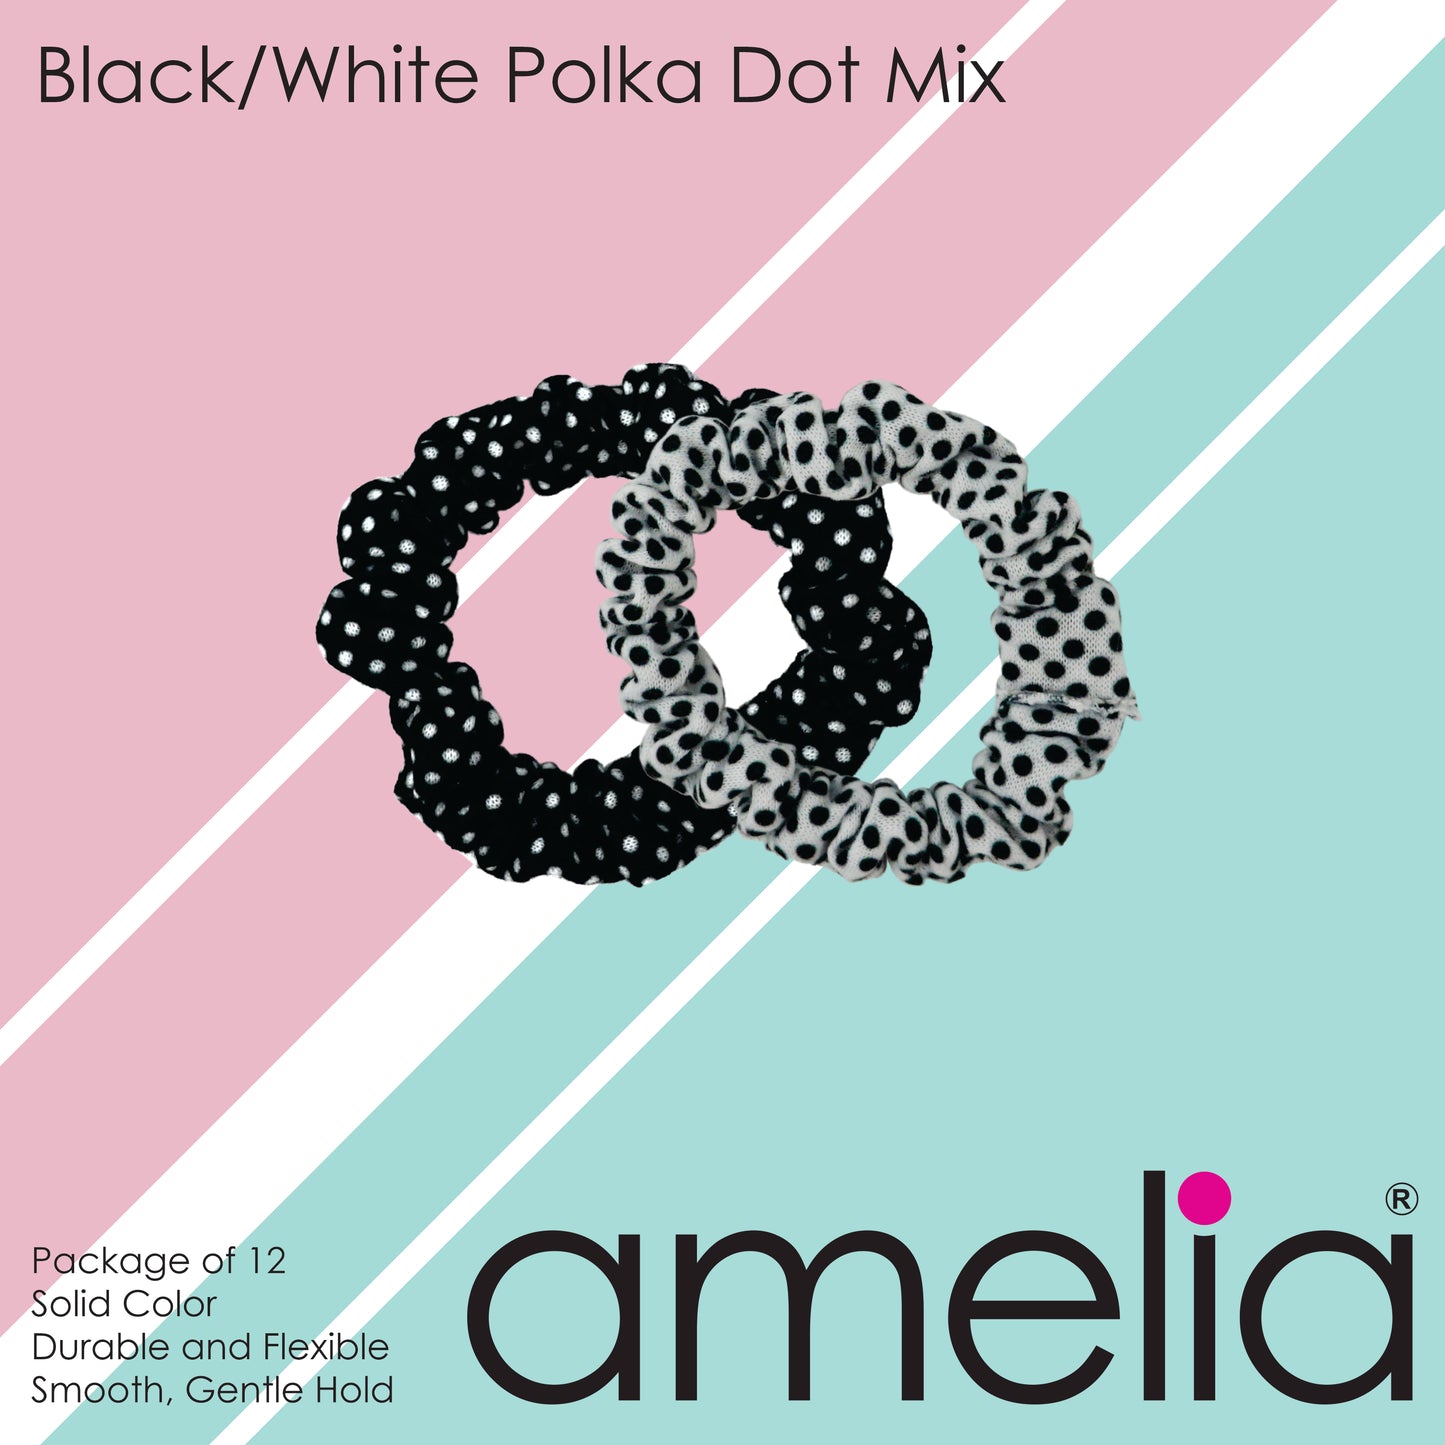 Amelia Beauty, Black and White Polka Dot Mix Jersey Scrunchies, 2.25in Diameter, Gentle on Hair, Strong Hold, No Snag, No Dents or Creases. 12 Pack